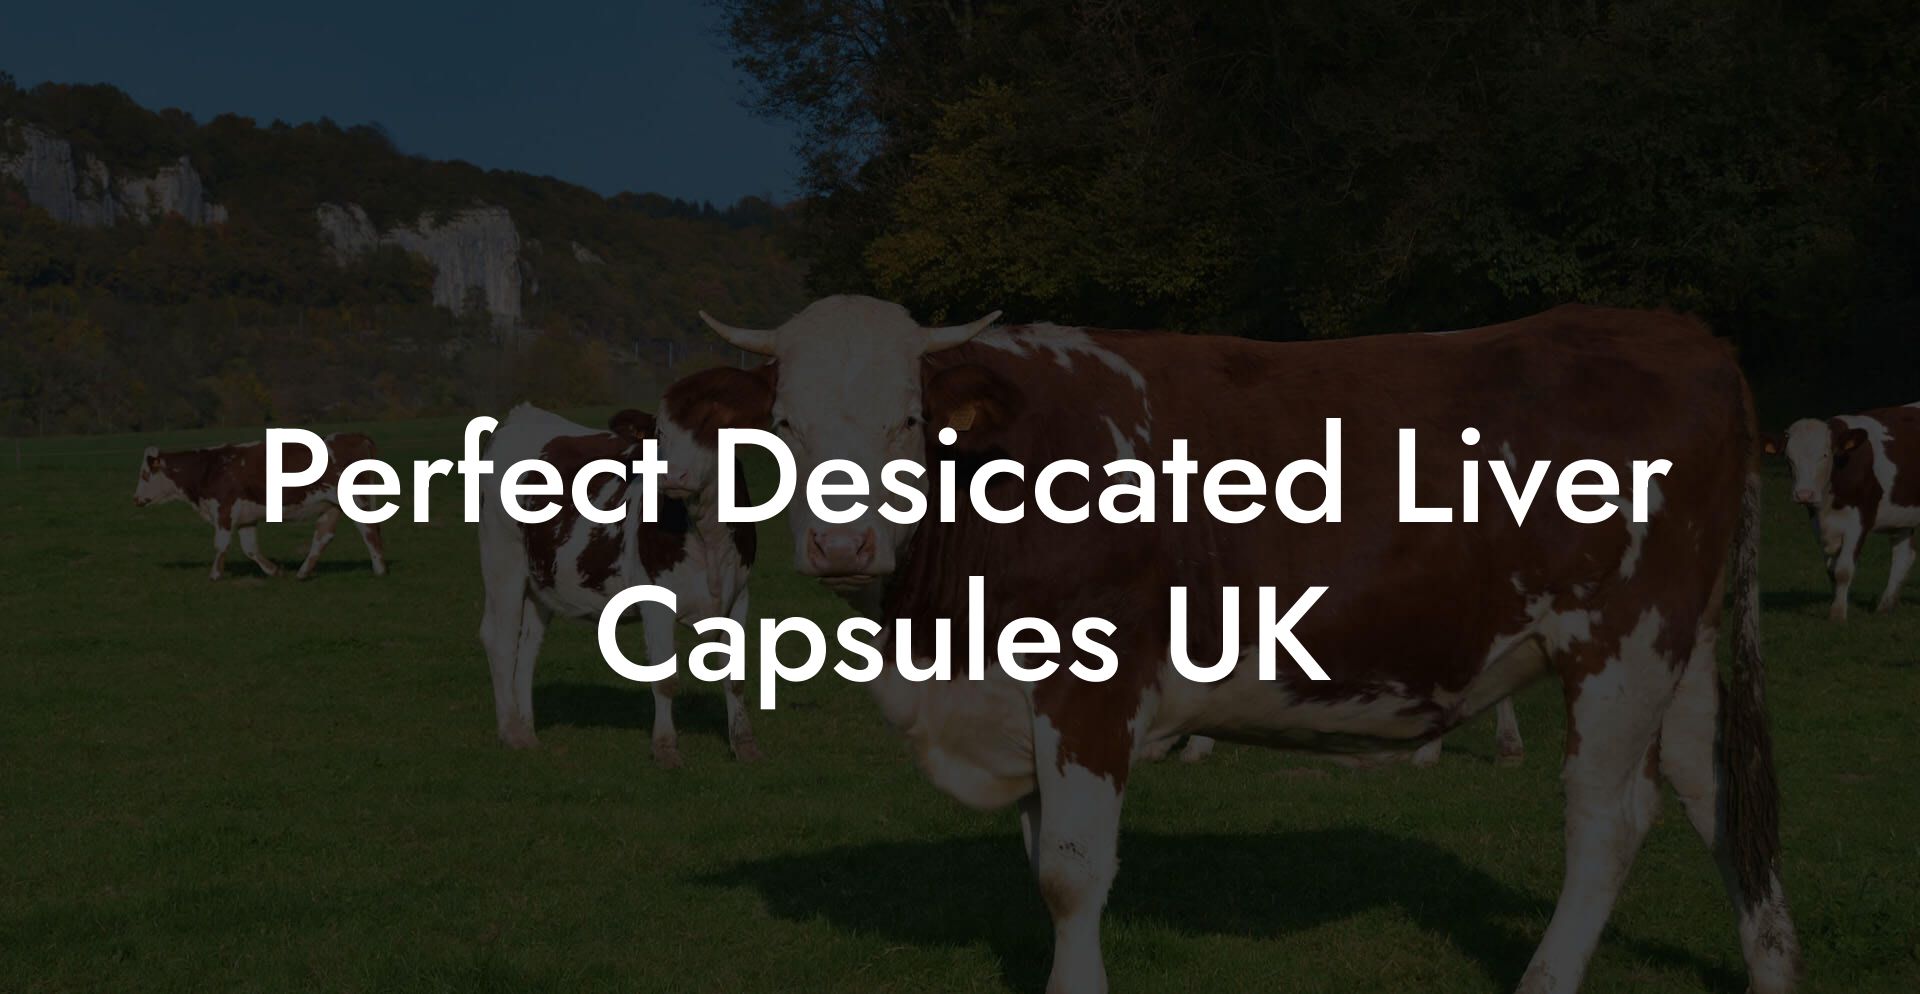 Perfect Desiccated Liver Capsules UK